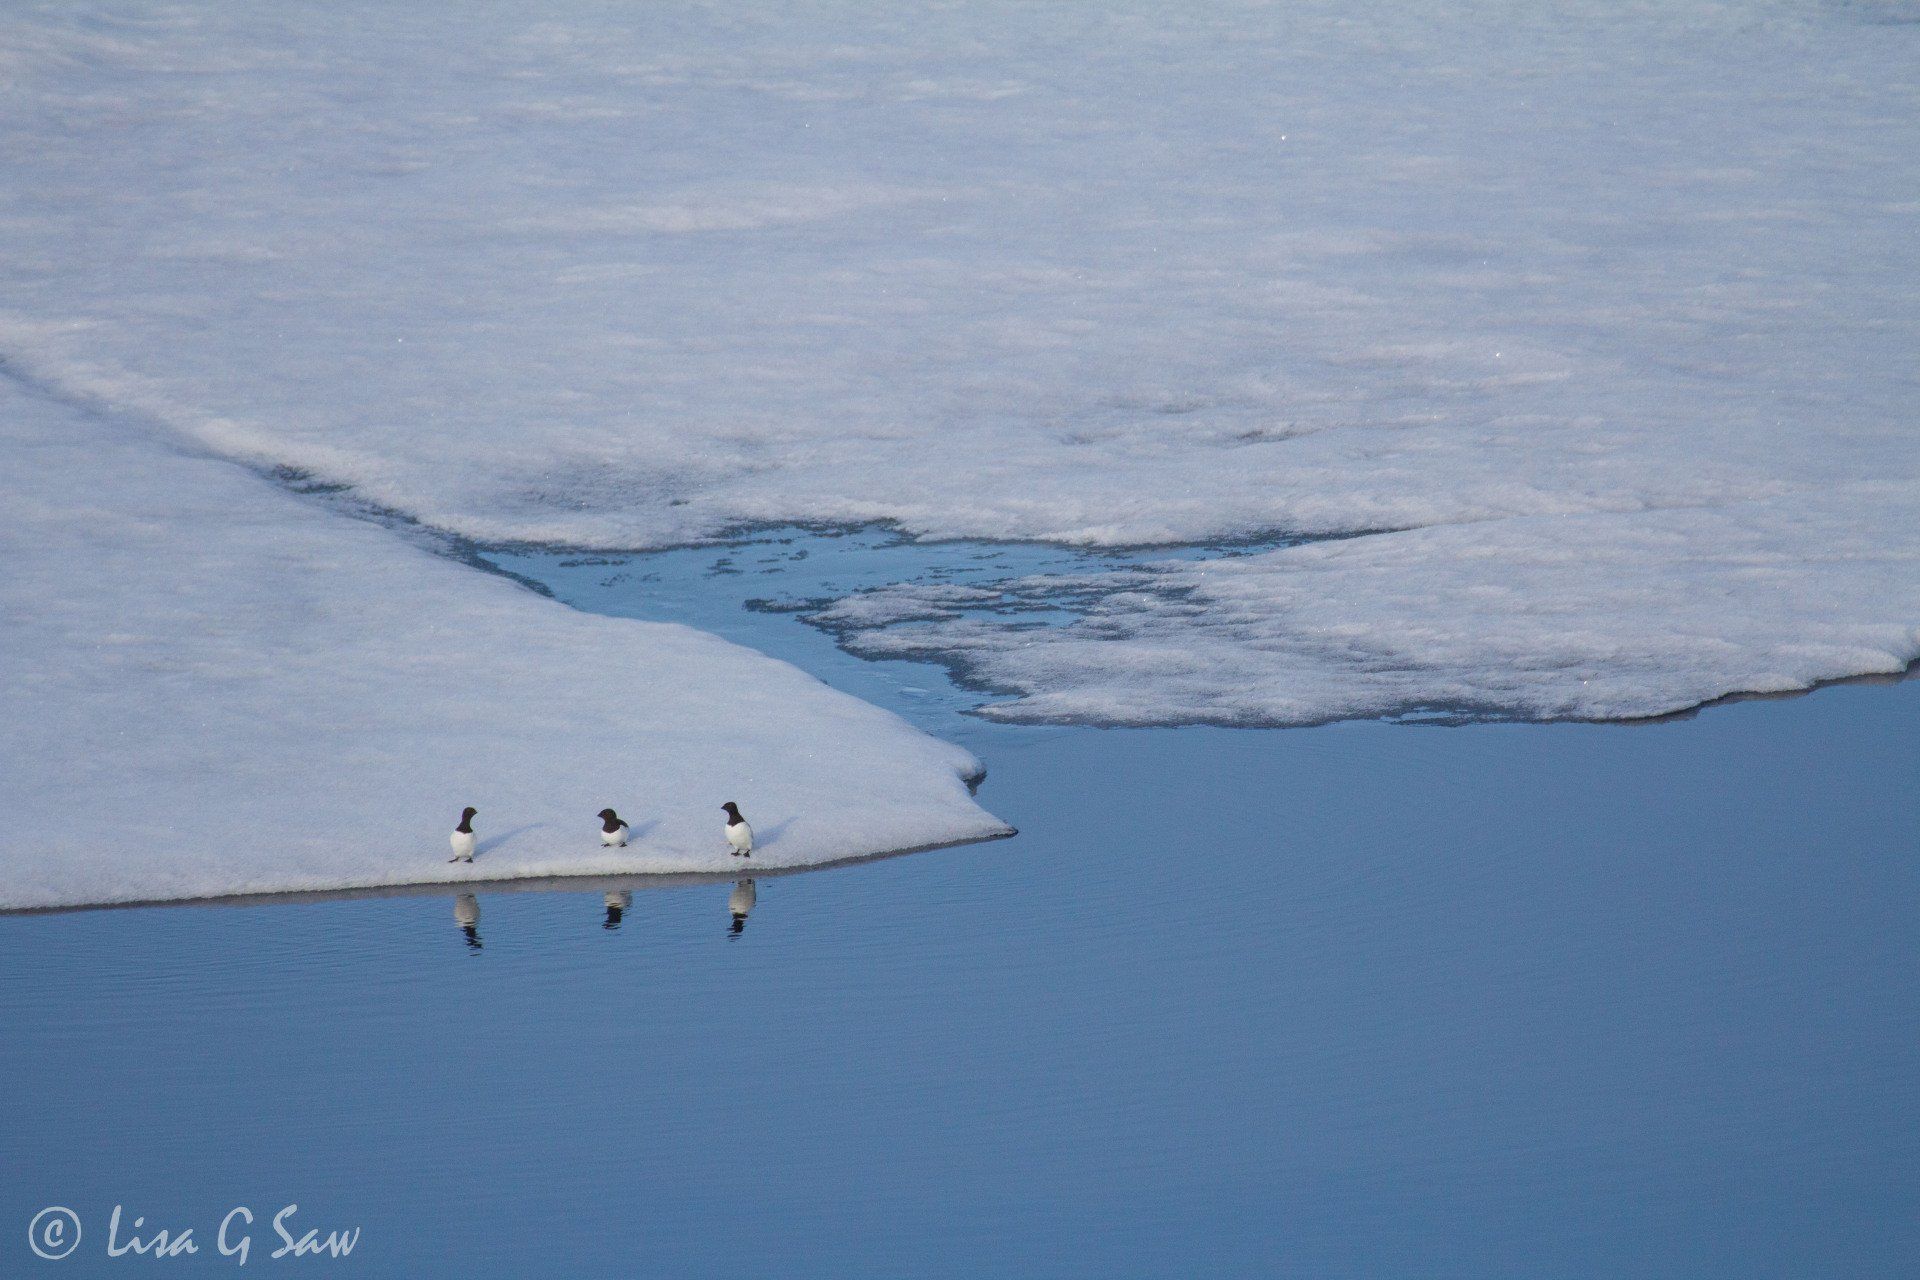 Three Guillimot's on edge of Arctic sea ice reflected in water